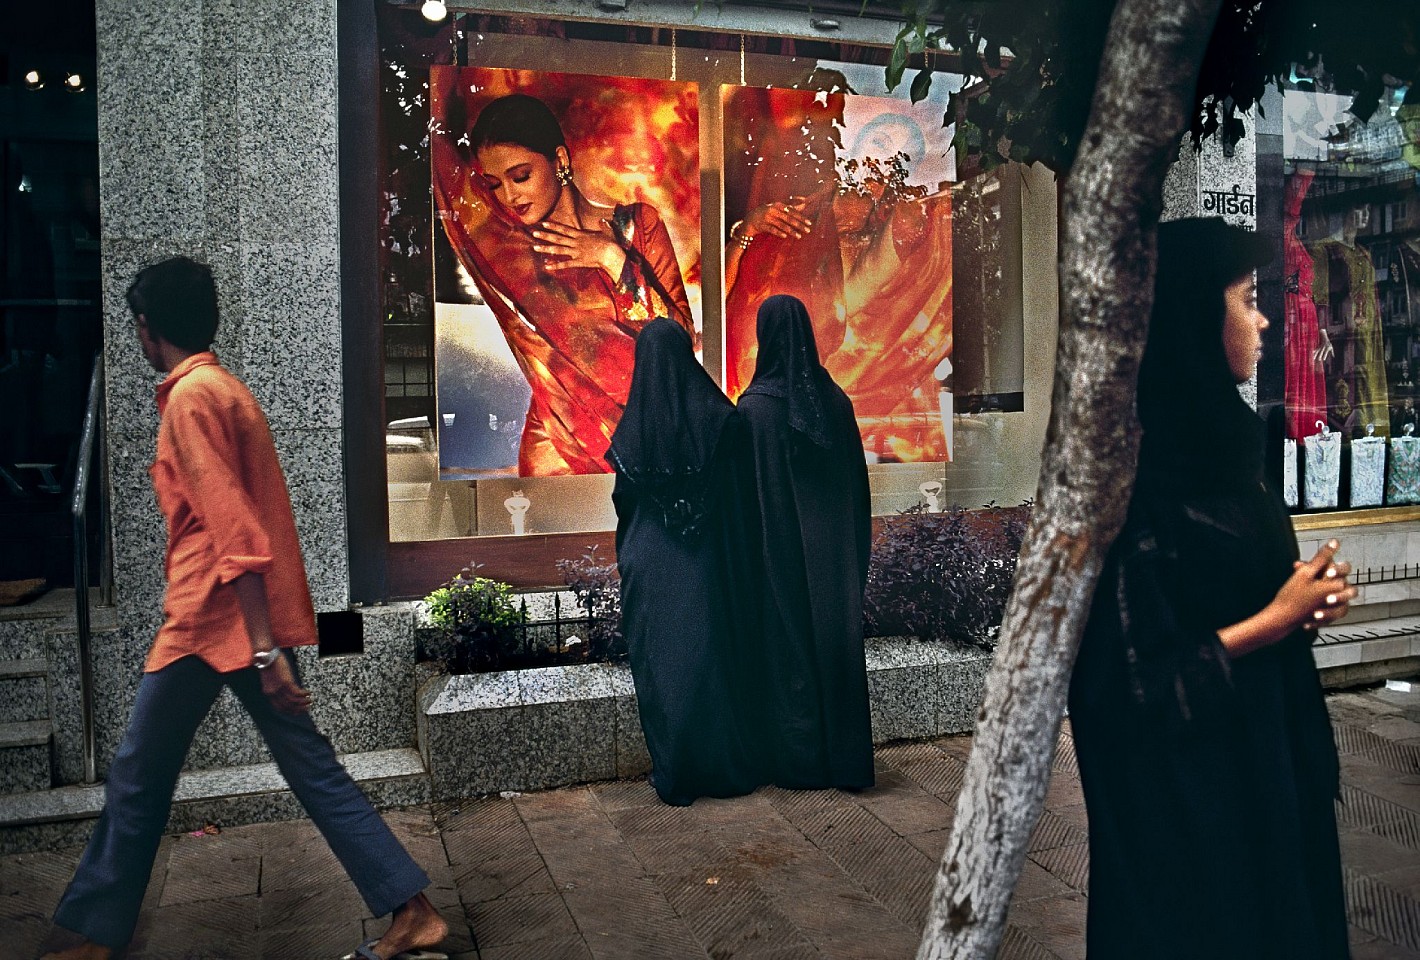 Steve McCurry, Woman Stares at Vitrine, 1996
FujiFlex Crystal Archive Print
Price/Size on request